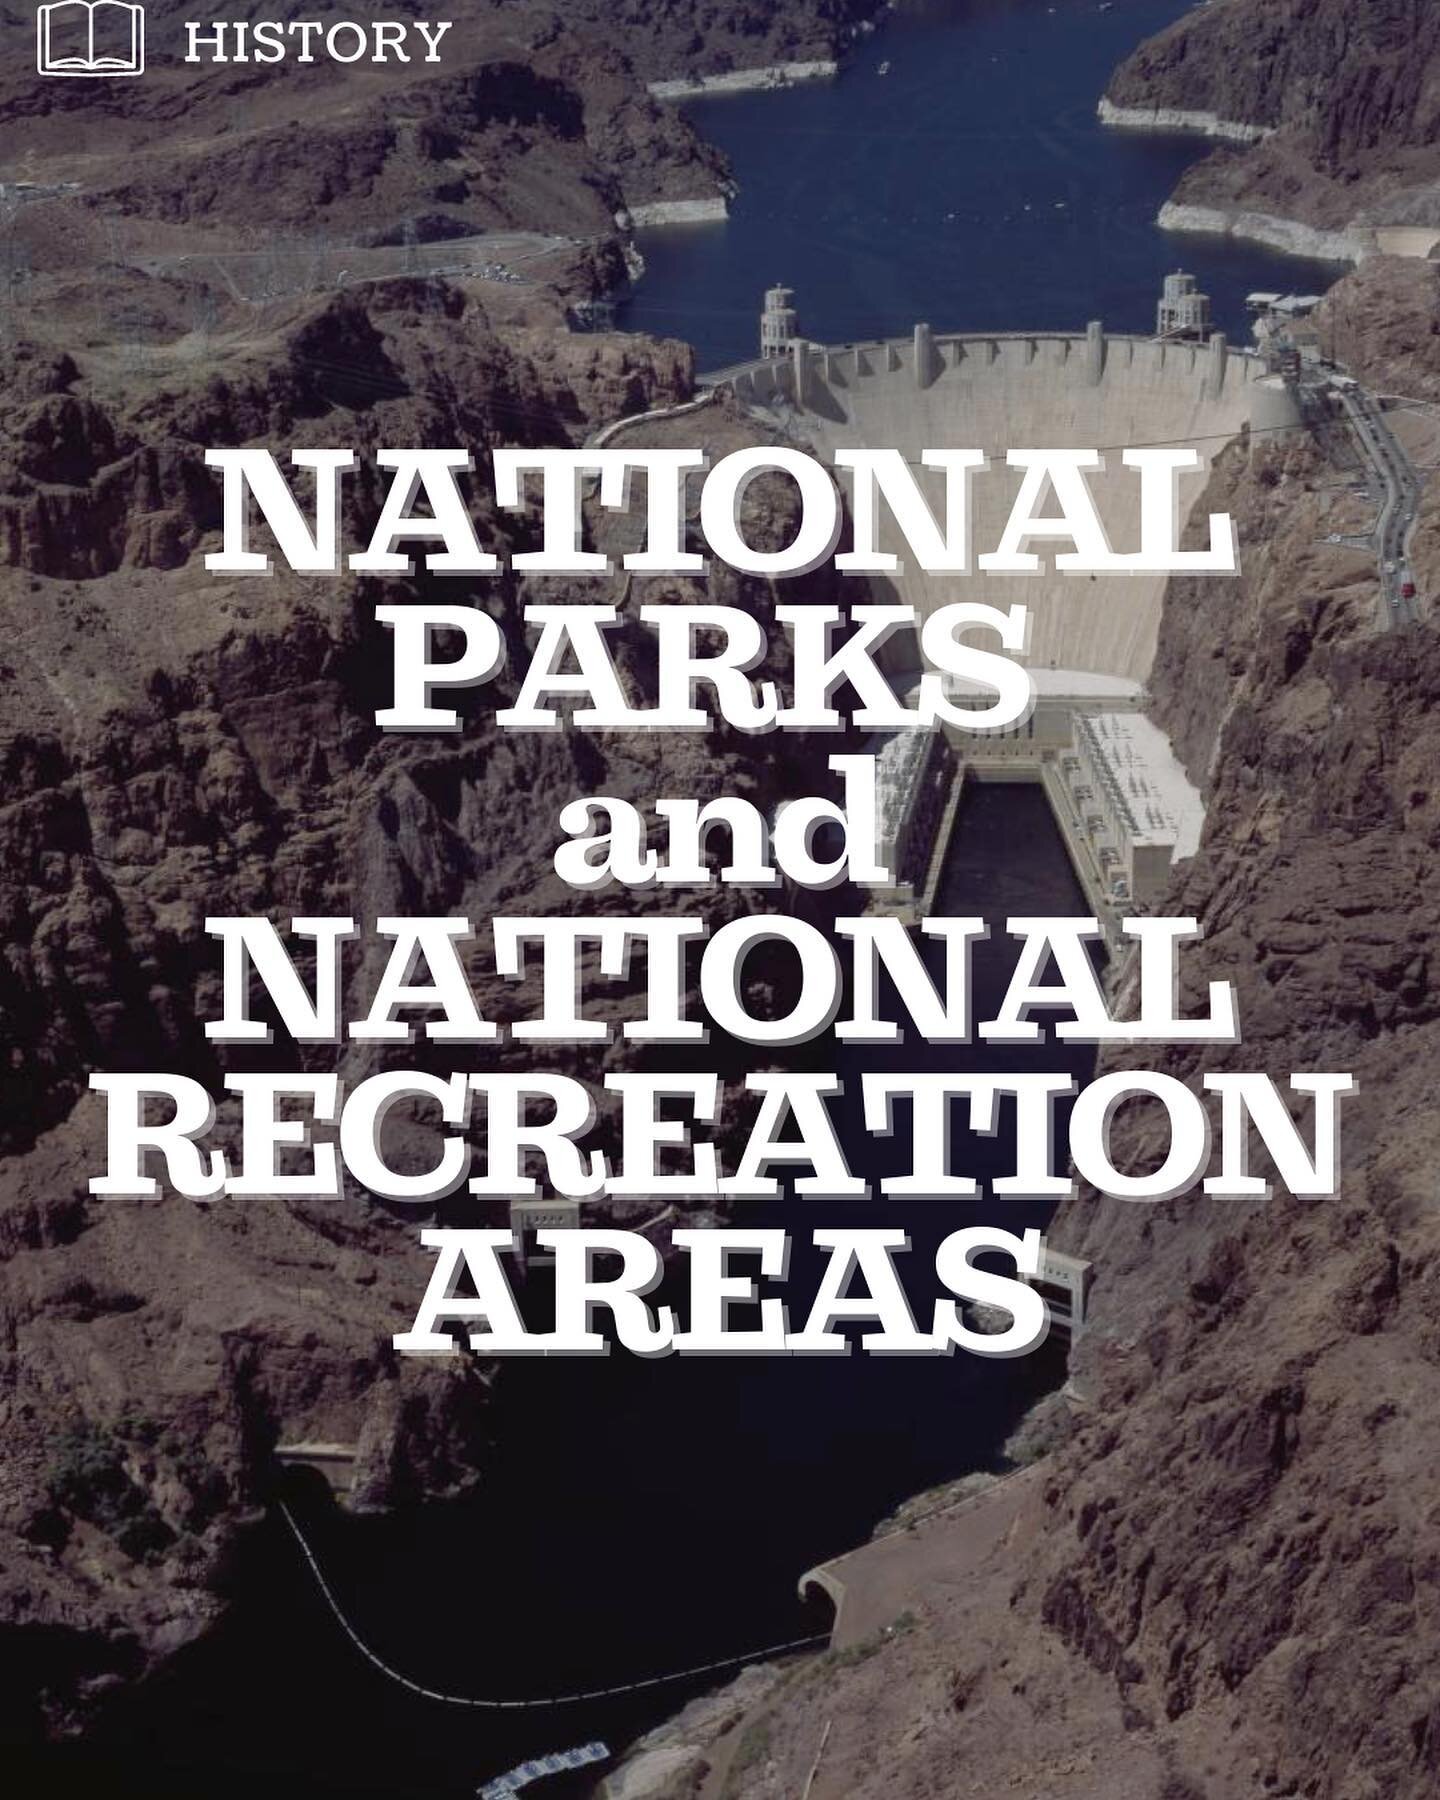 Learn more about the history of how national parks &amp; recreation areas were established